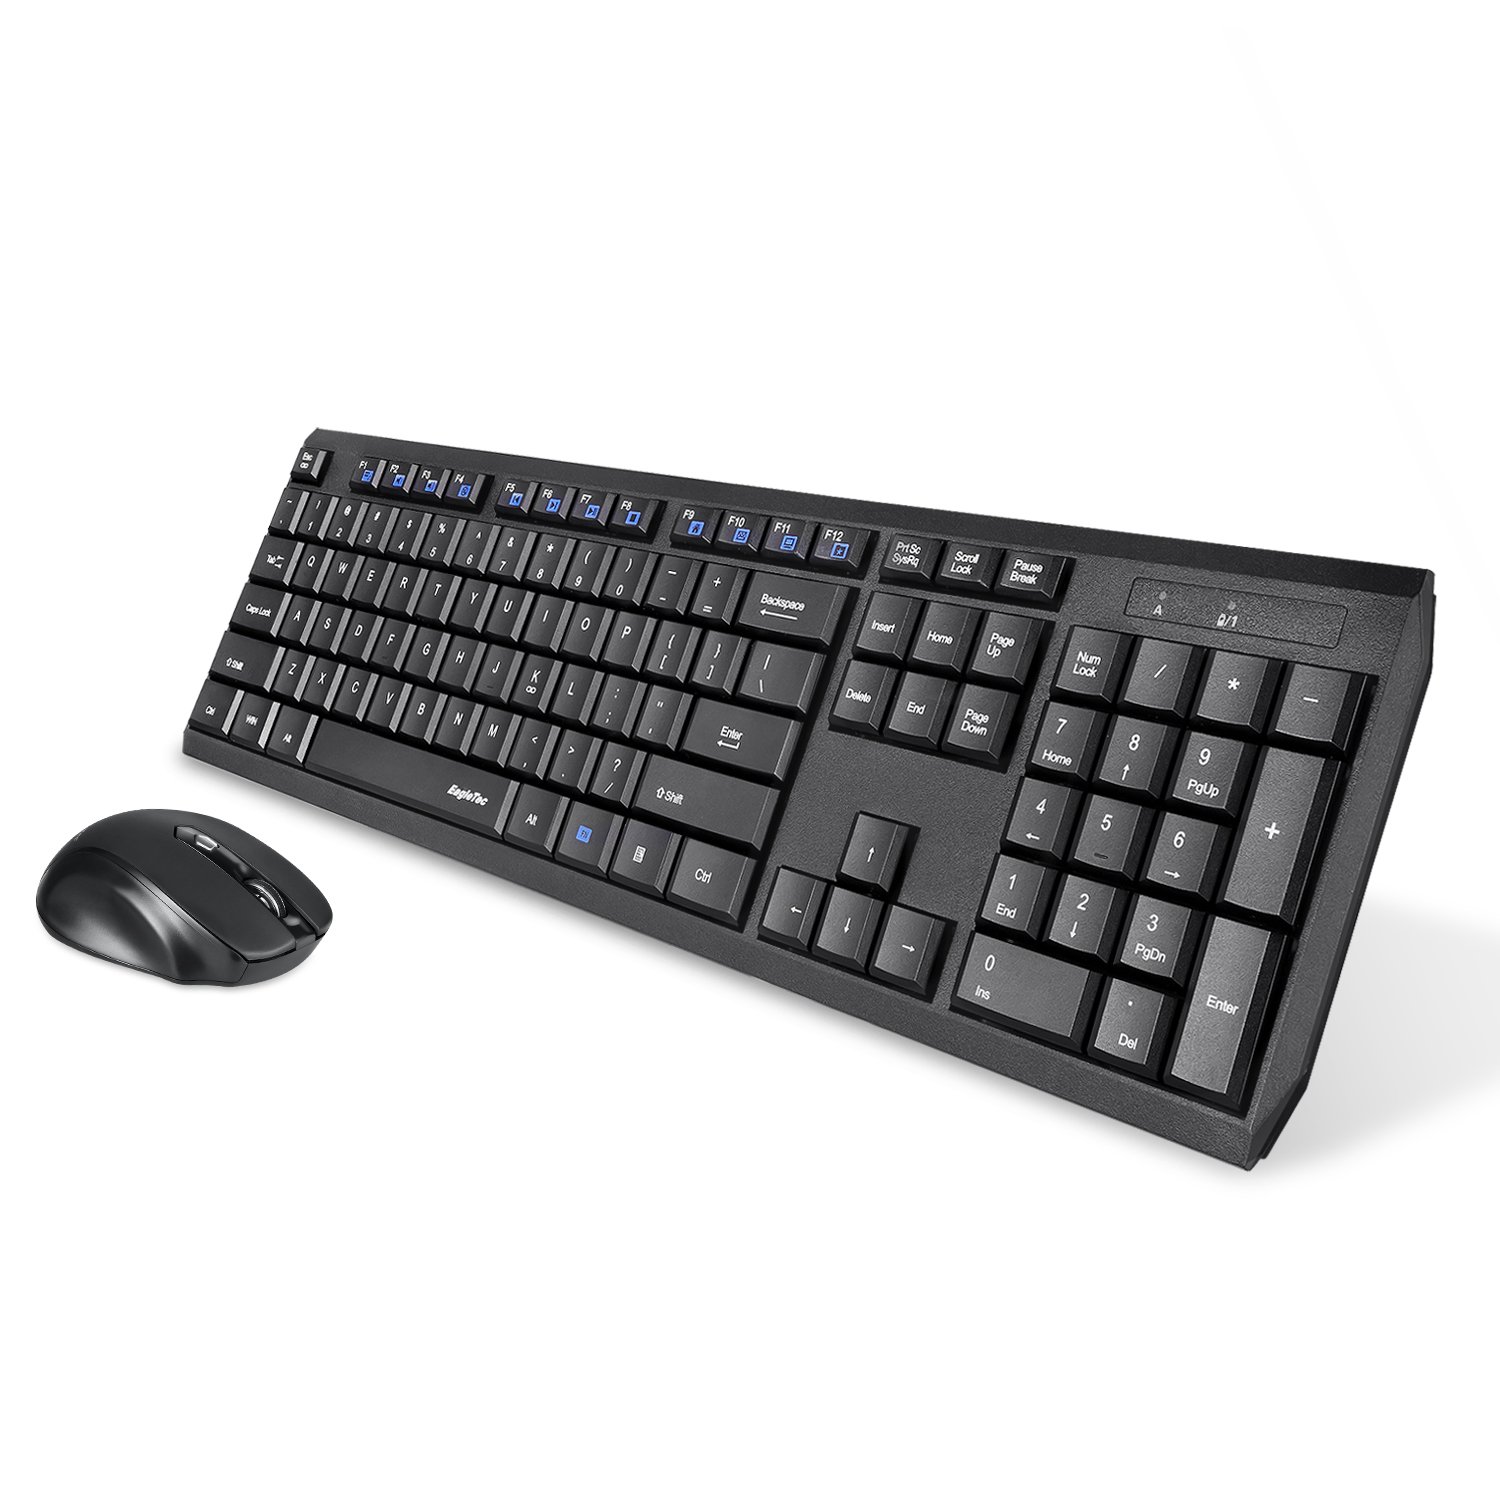 Book Cover Eagletec K104 Wireless Keyboard and Mouse Combo Slim, Flat & Quiet, Ergonomic Full Size 104 Keys Keyboard & Portable Wireless Mouse for Windows PC (Black Wireless Keyboard & Mouse Set)